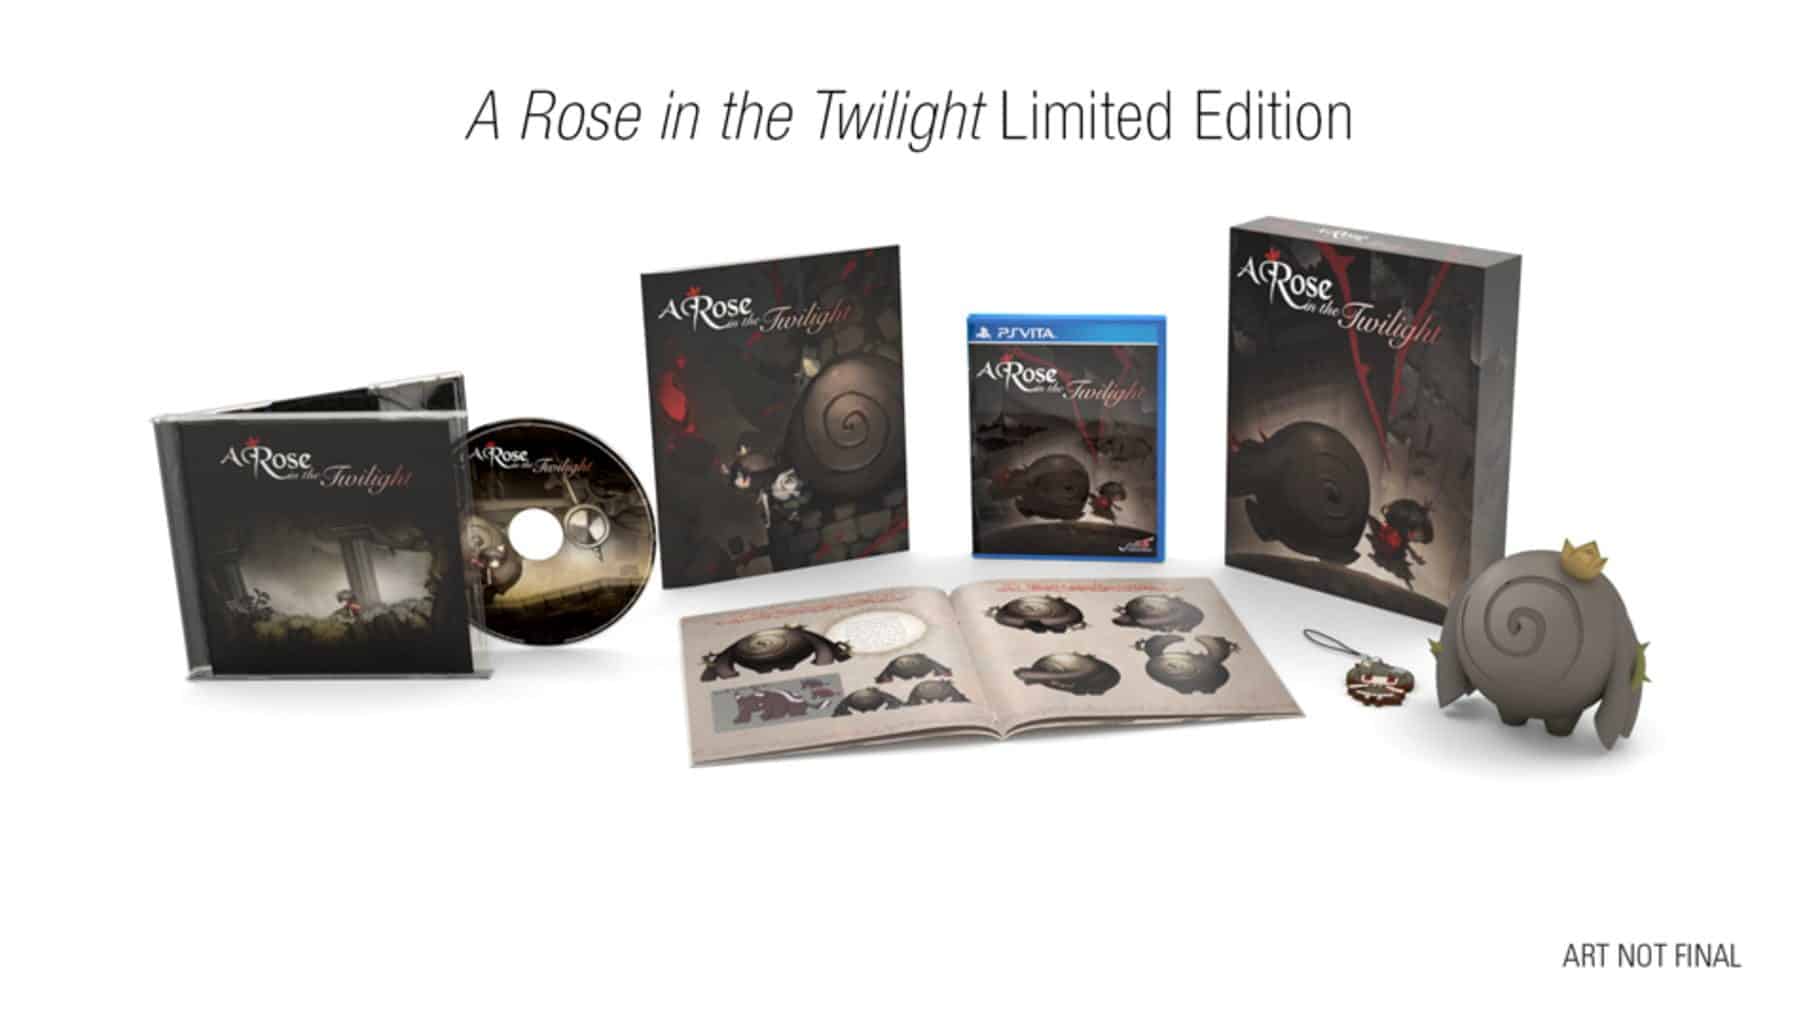 A Rose in the Twilight Limited Edition